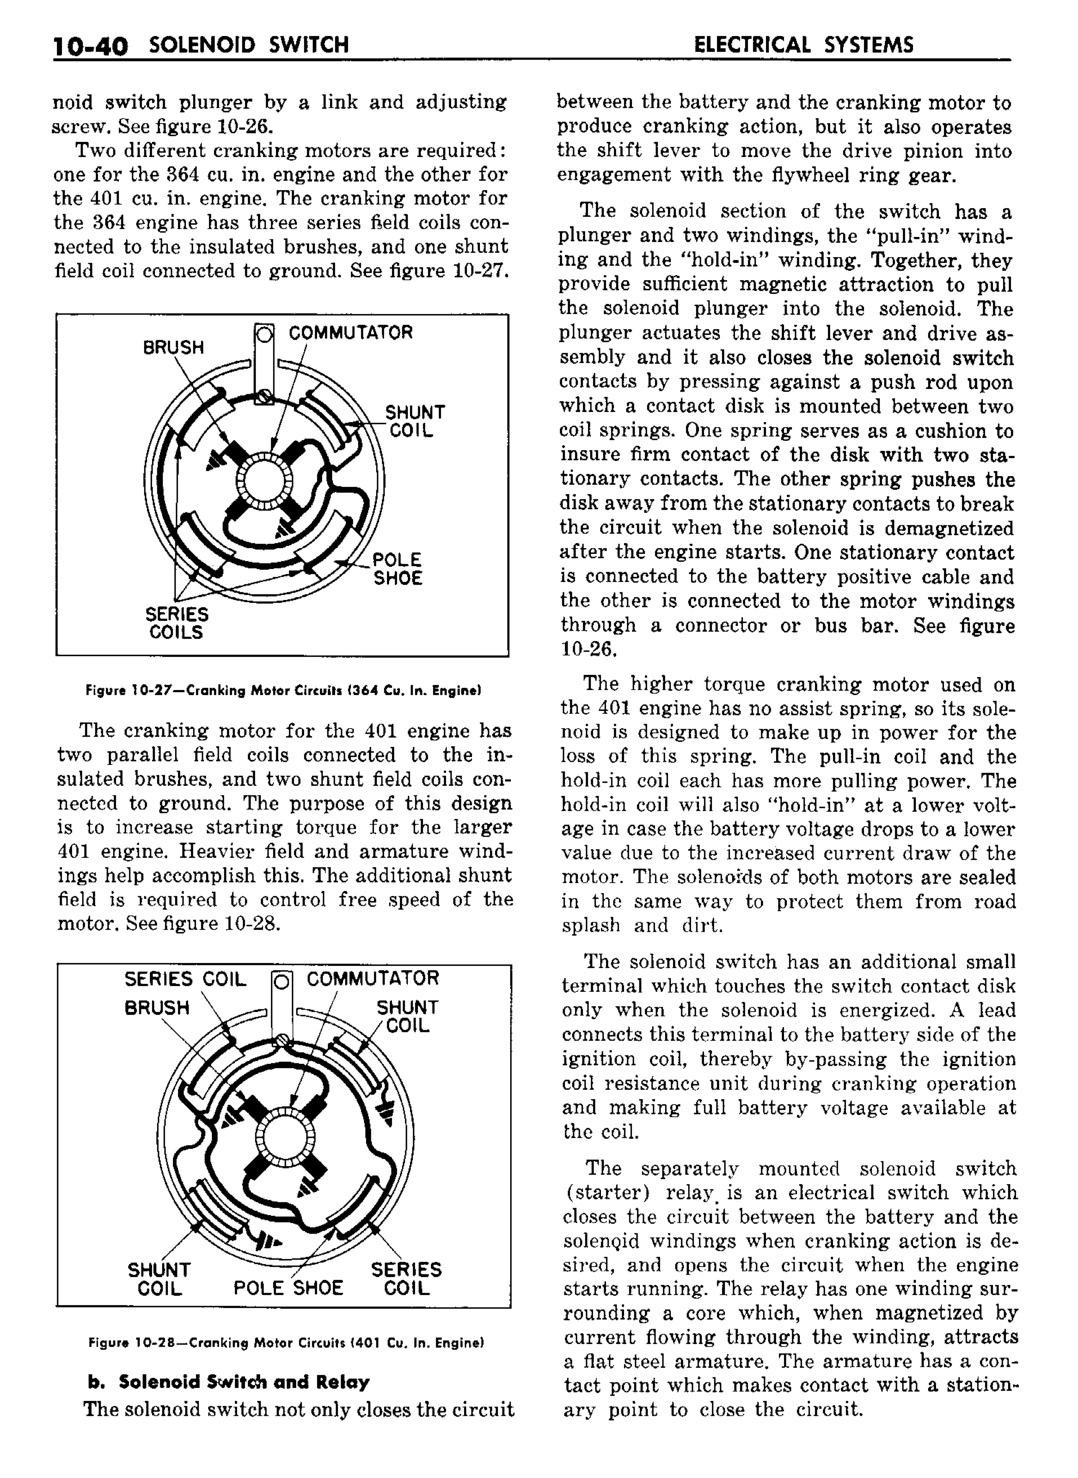 n_11 1960 Buick Shop Manual - Electrical Systems-040-040.jpg